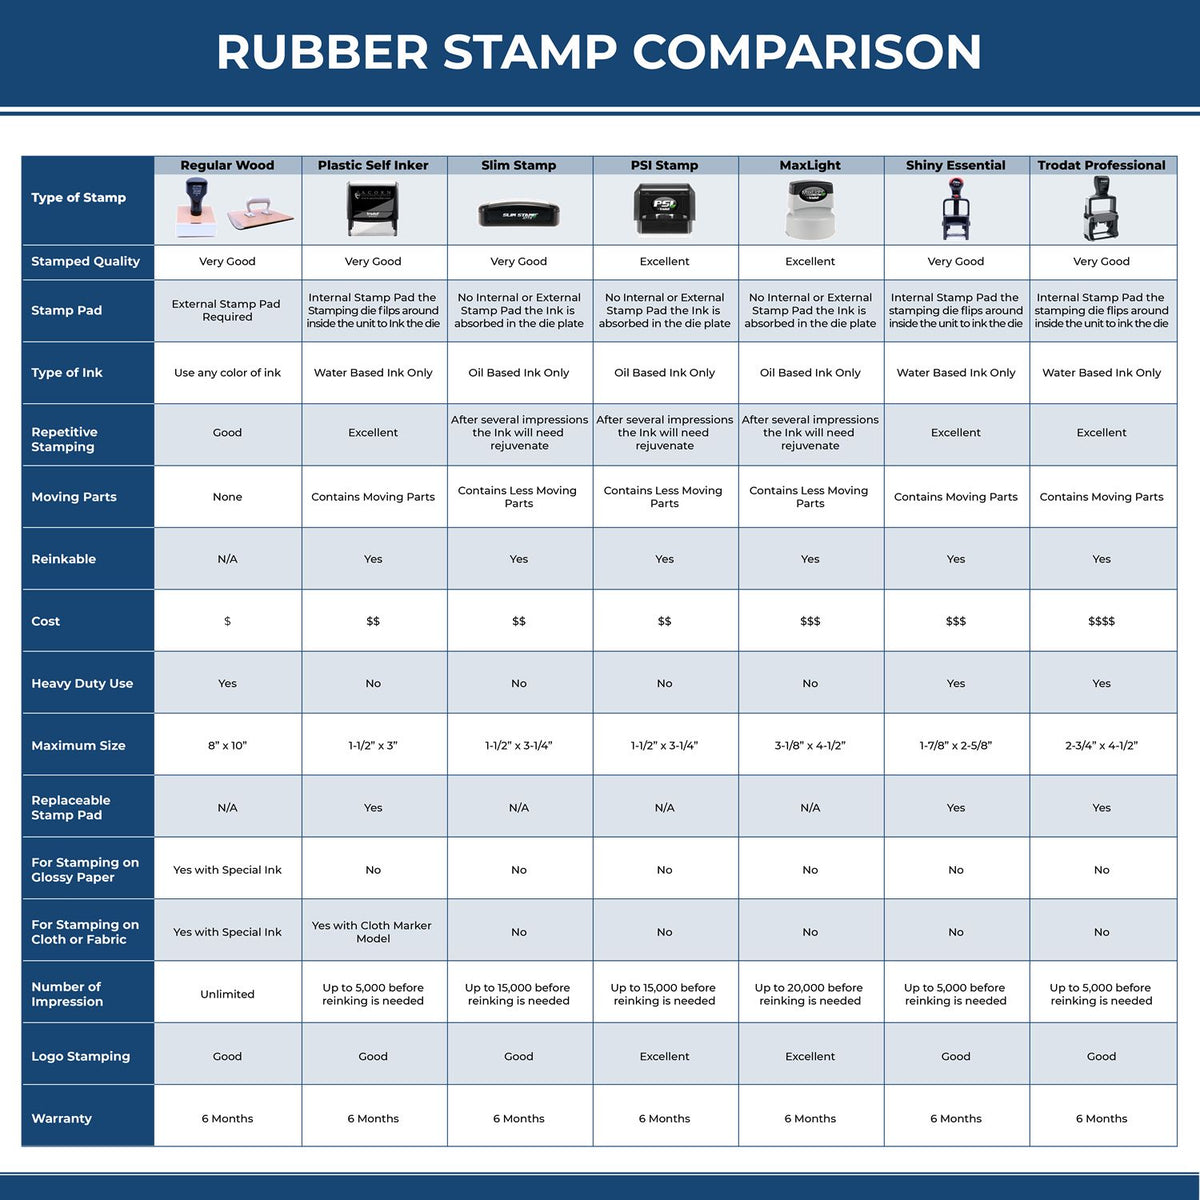 A comparison chart for the different types of mount models available for the Self-Inking Rectangular Maryland Notary Stamp.